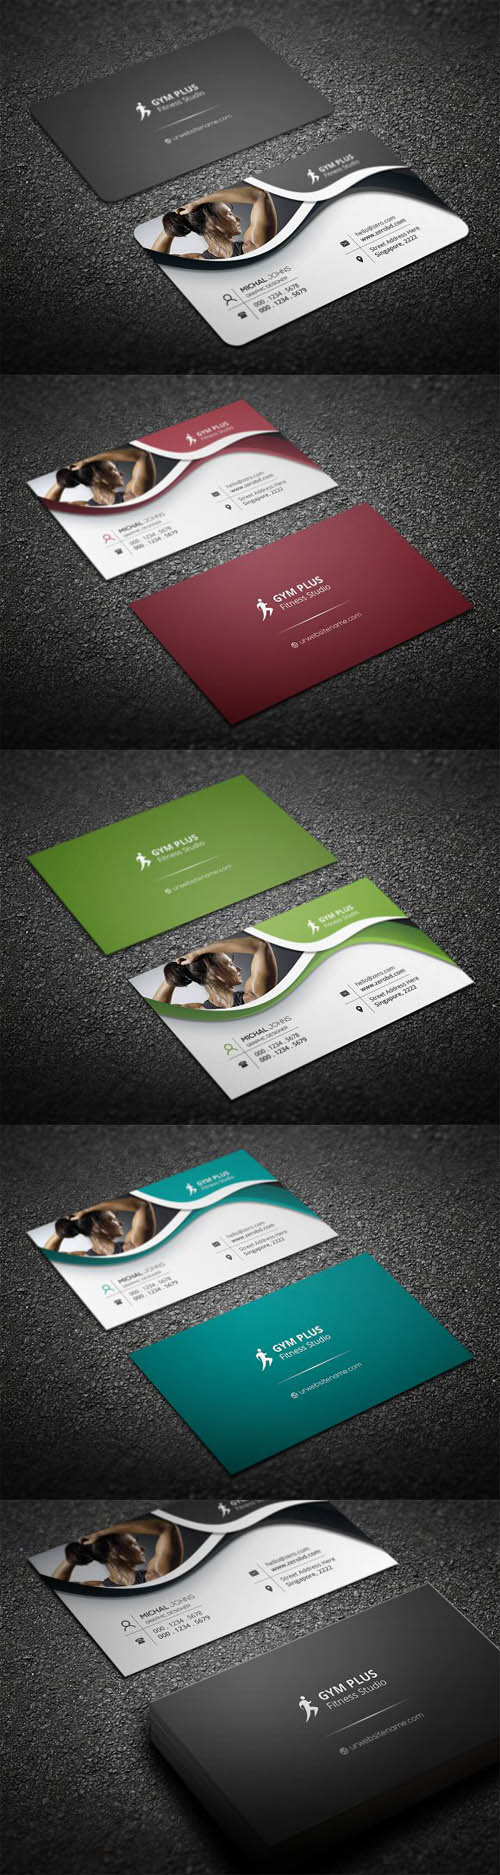 Gym Fitness Business Card 1338388